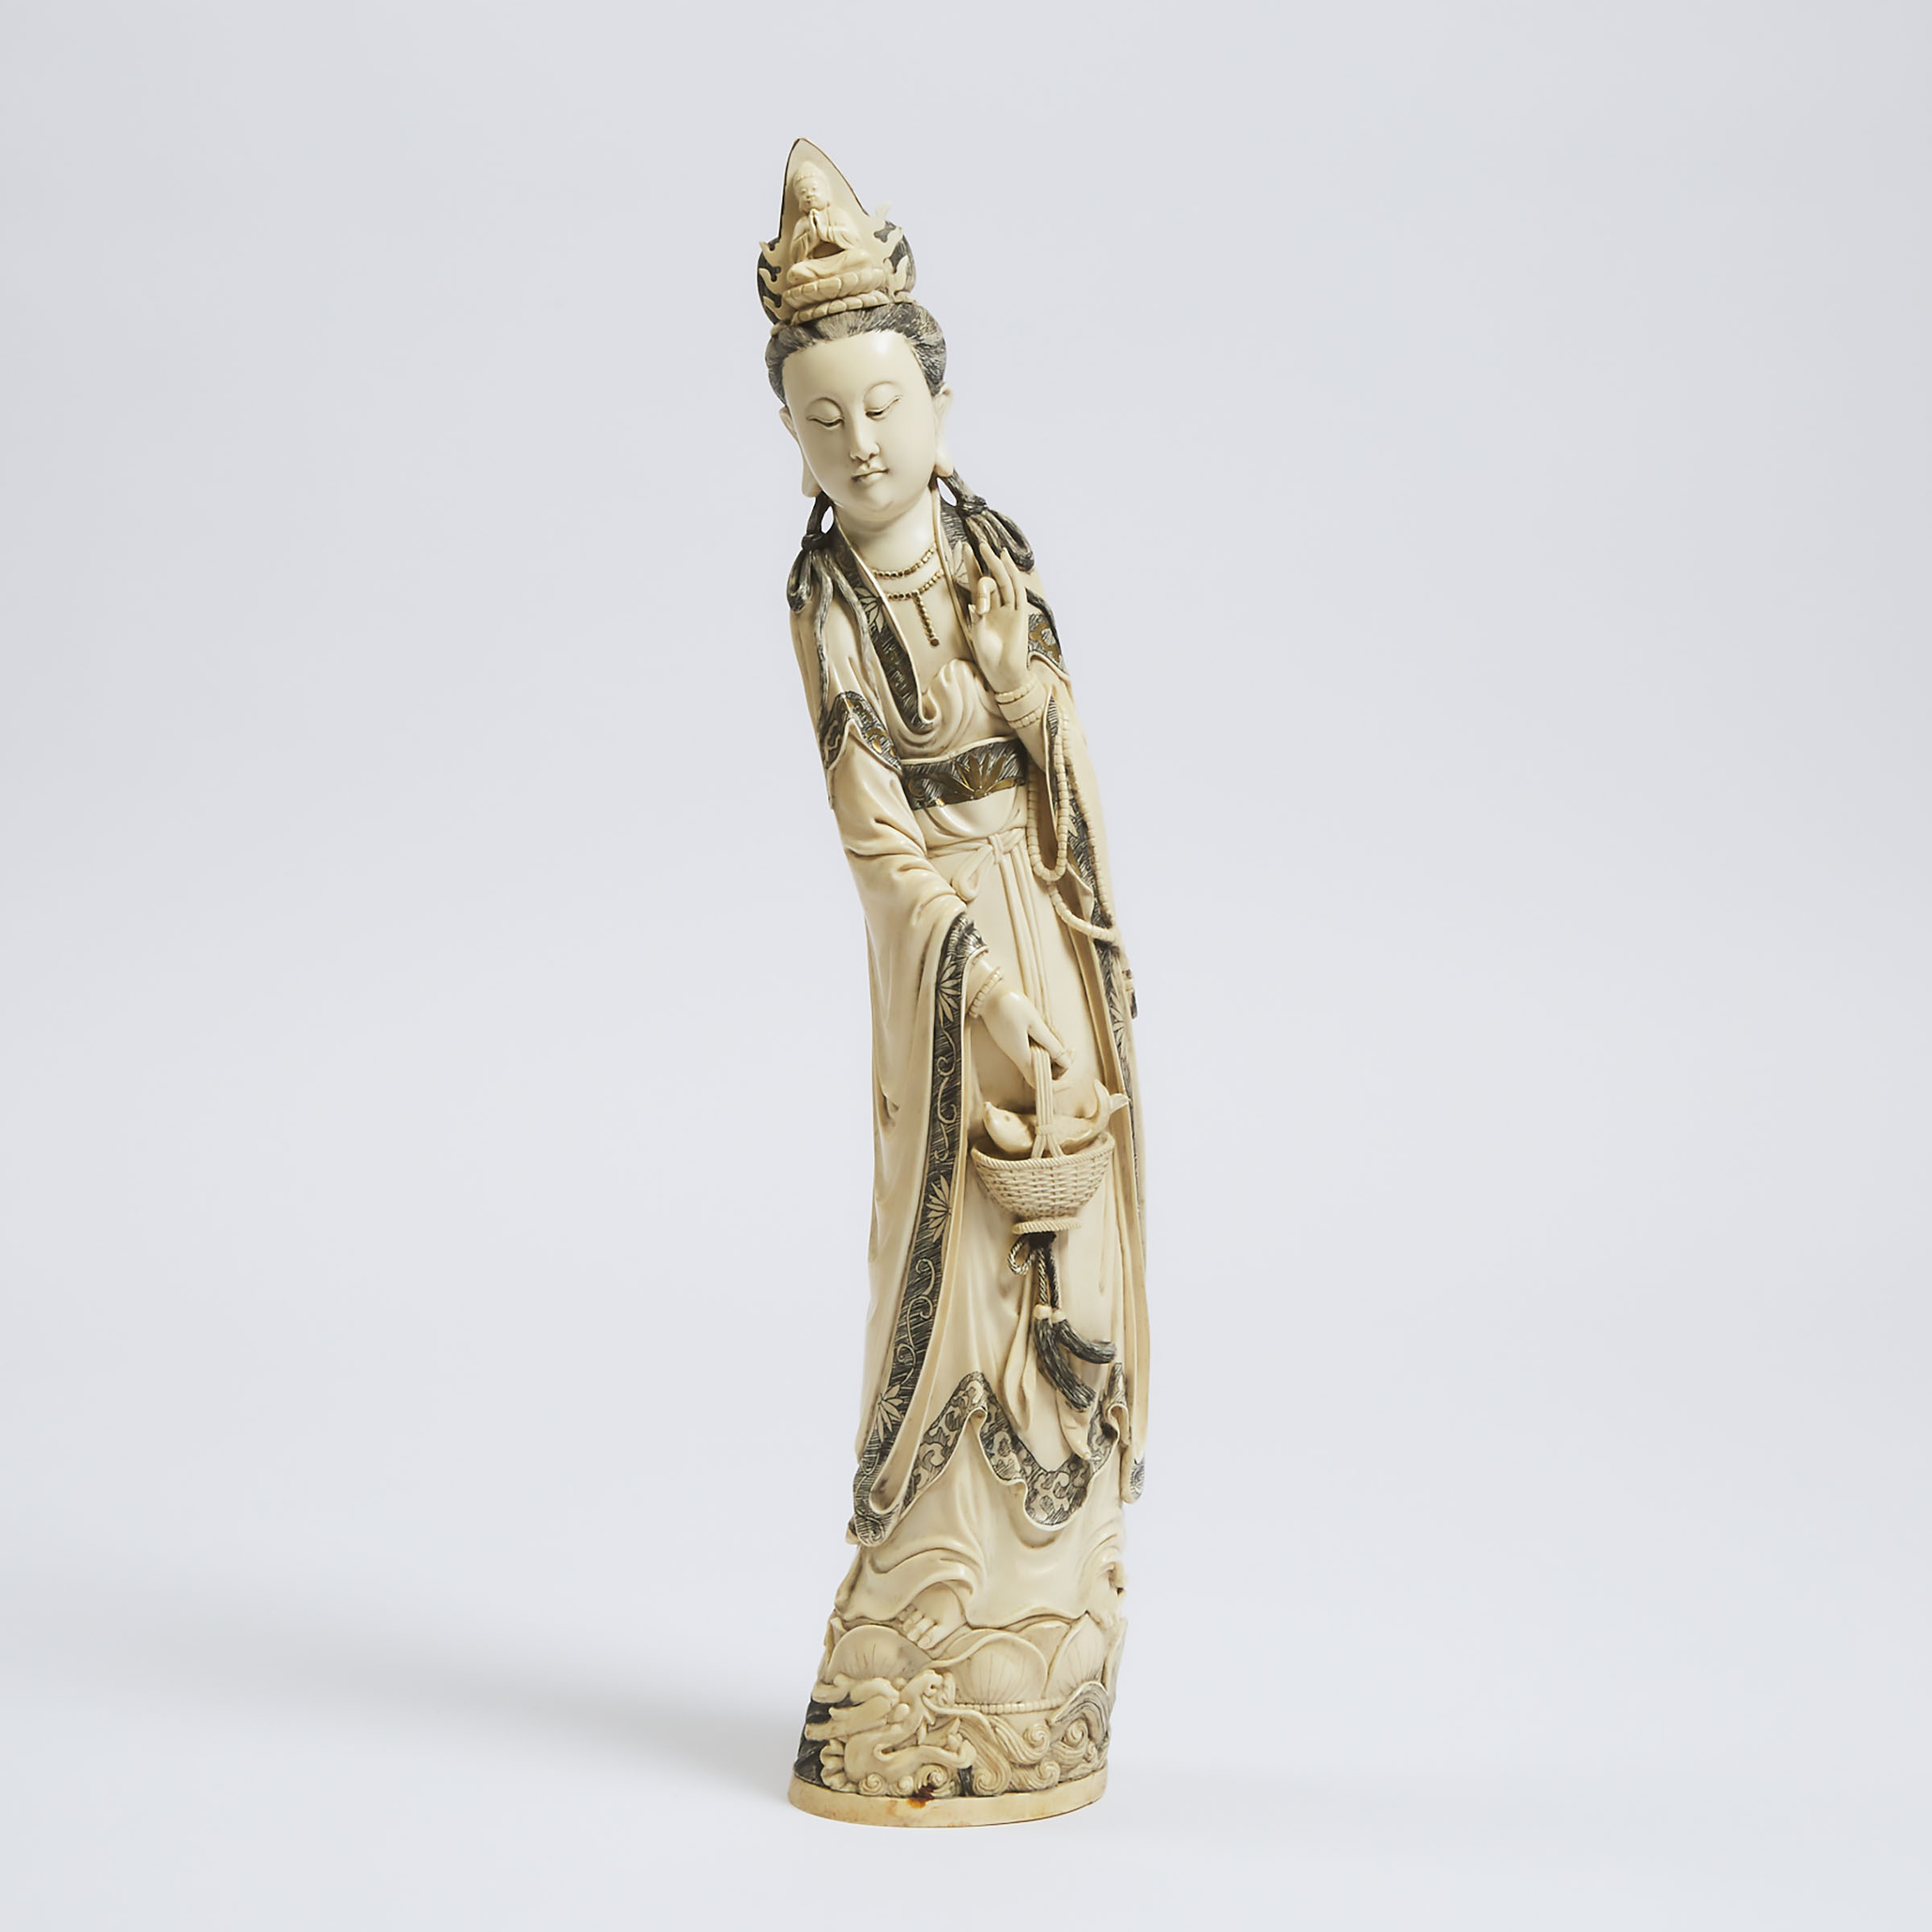 A Large Ivory Figure of Guanyin Holding a Basket With Fish, Early to Mid 20th Century